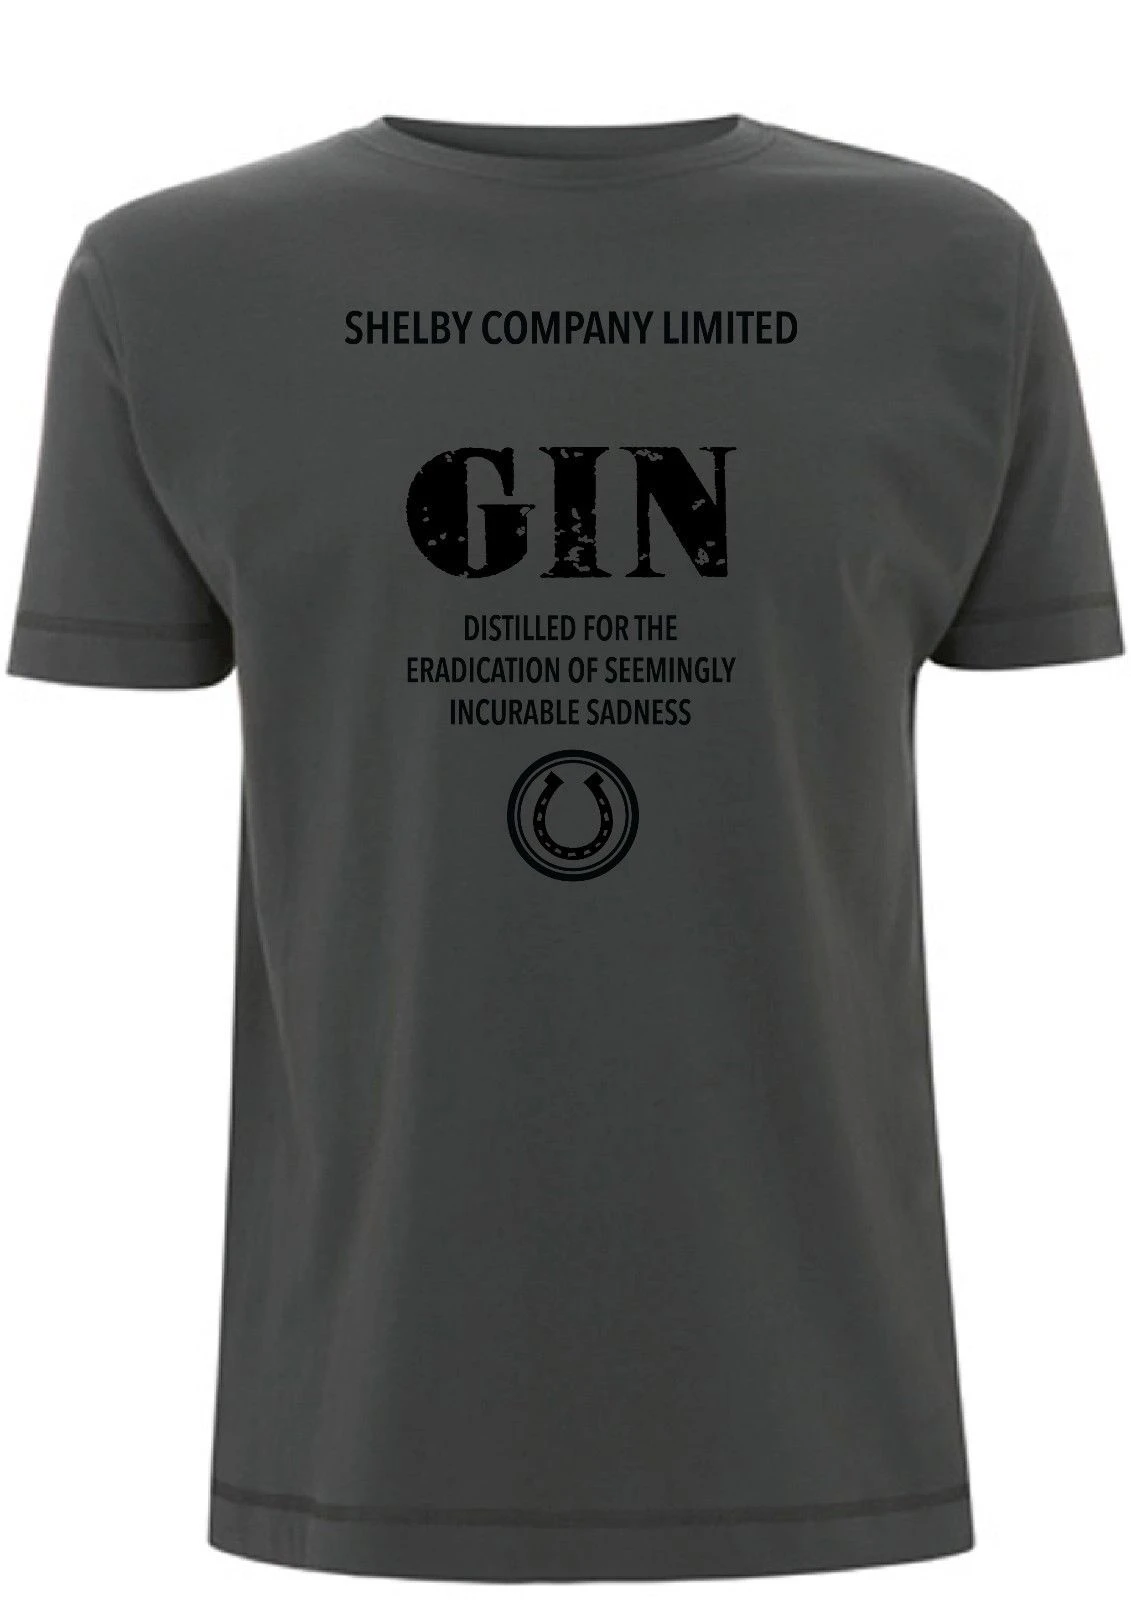 Shelby Company Limited Gin T-Shirt 